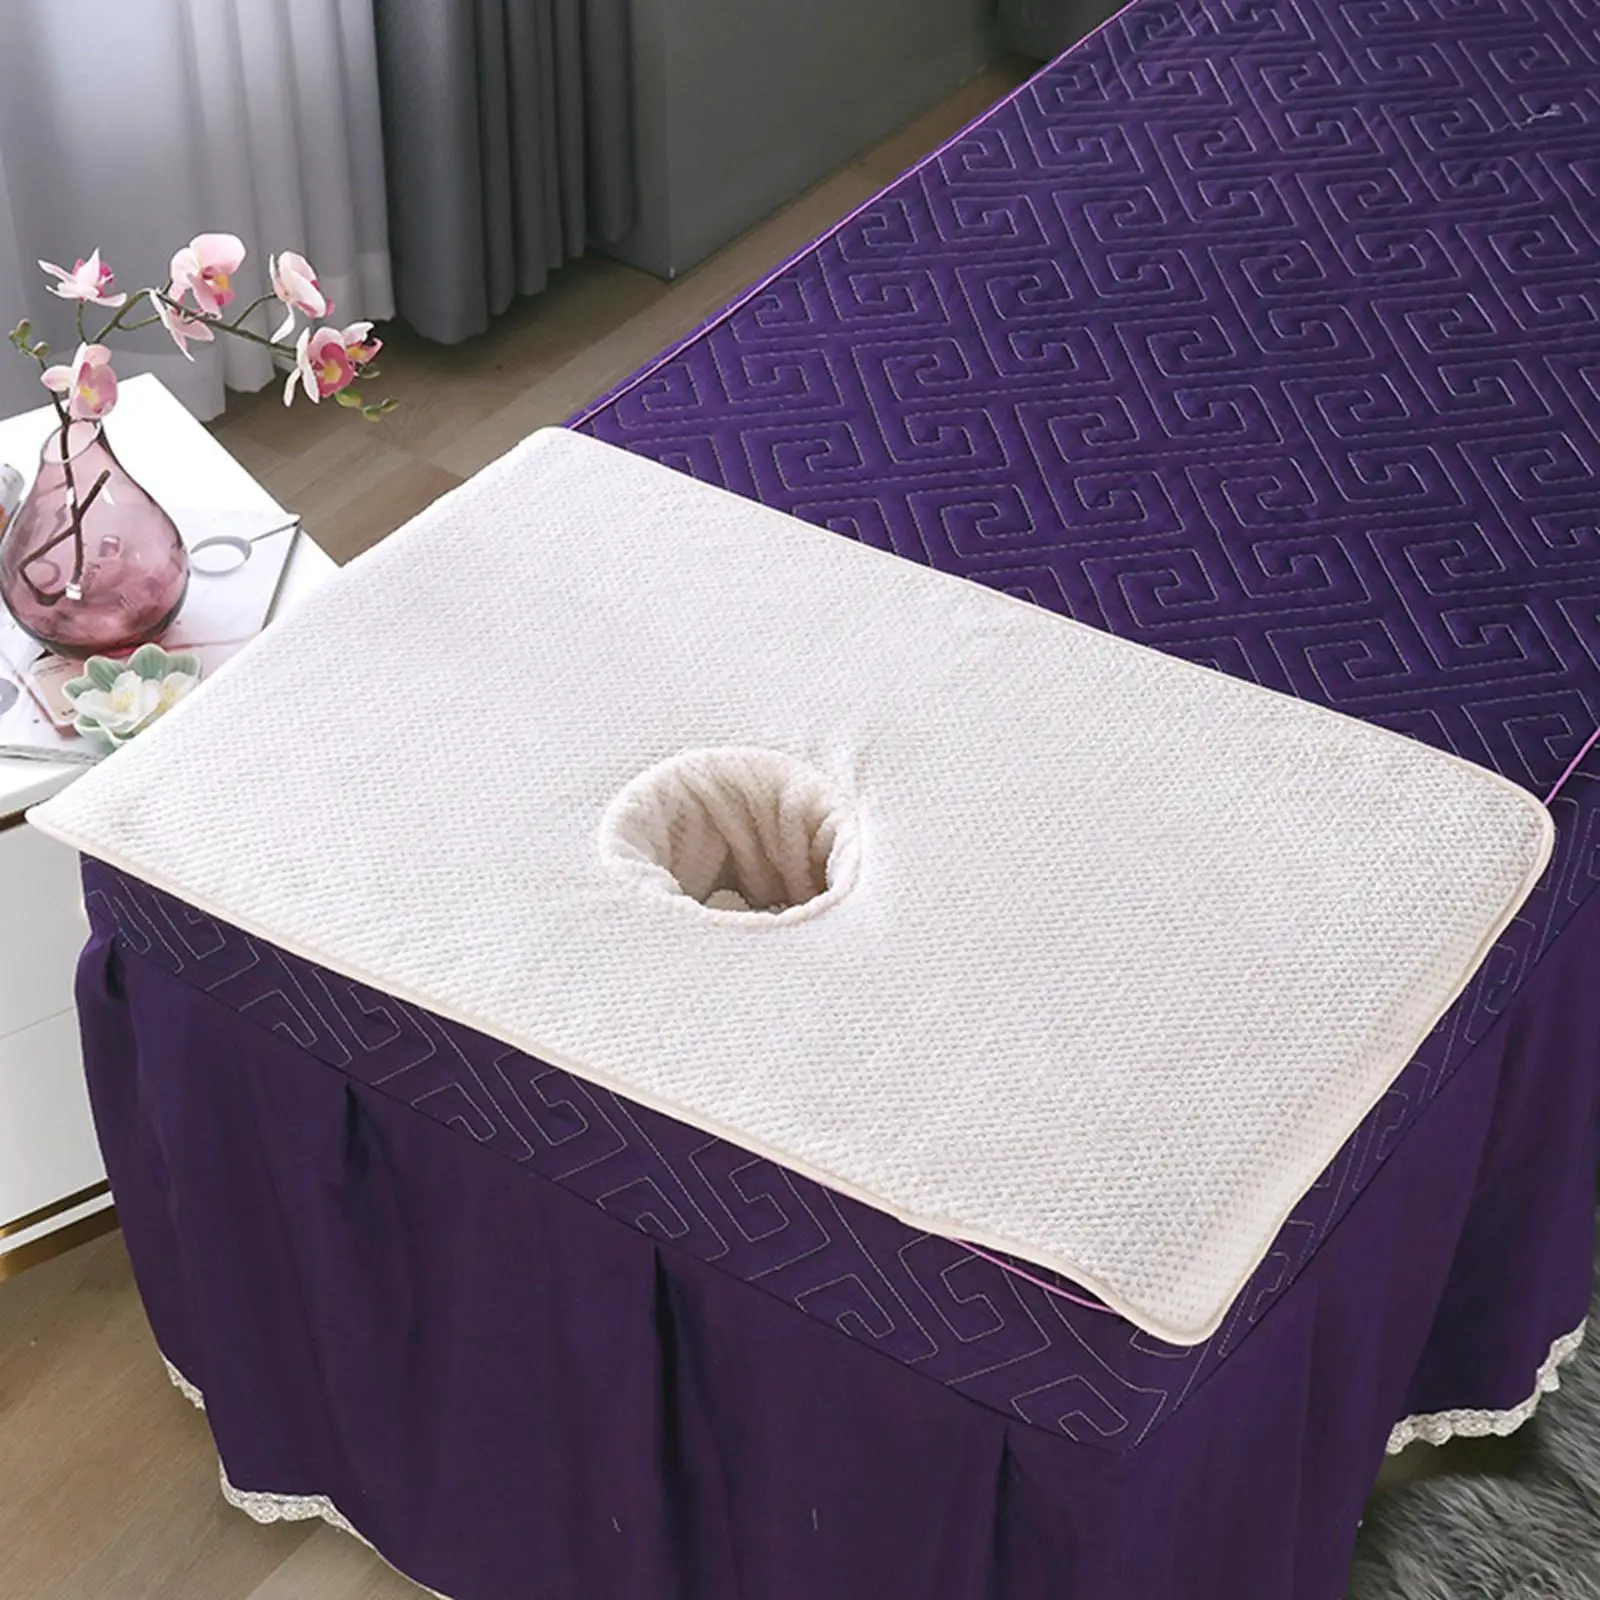 Massage Bed Cover Protector Universal with Breath Hole Washable Soft Reusable SPA Bed Sheet for SPA Massage Tables Bed 50x80cm